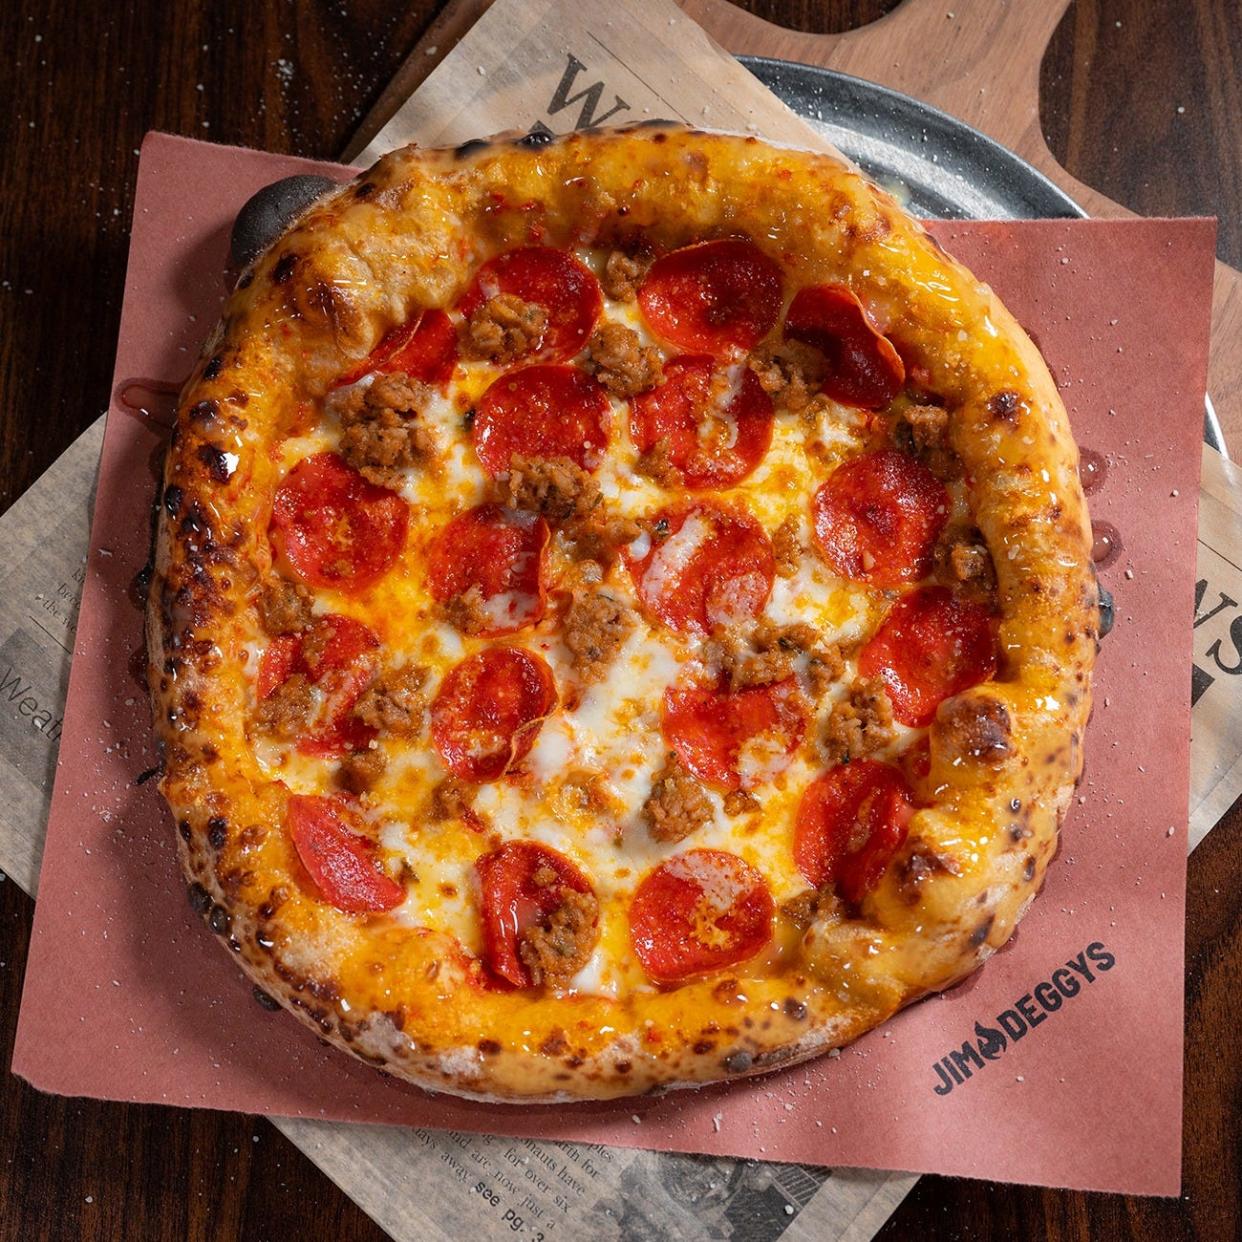 Jim Deggys Brick Oven Pizza and Brewery in Lafayette is opening its doors in the coming weeks. The restaurant will offer a wide variety of pizza, wings, appetizers and more.